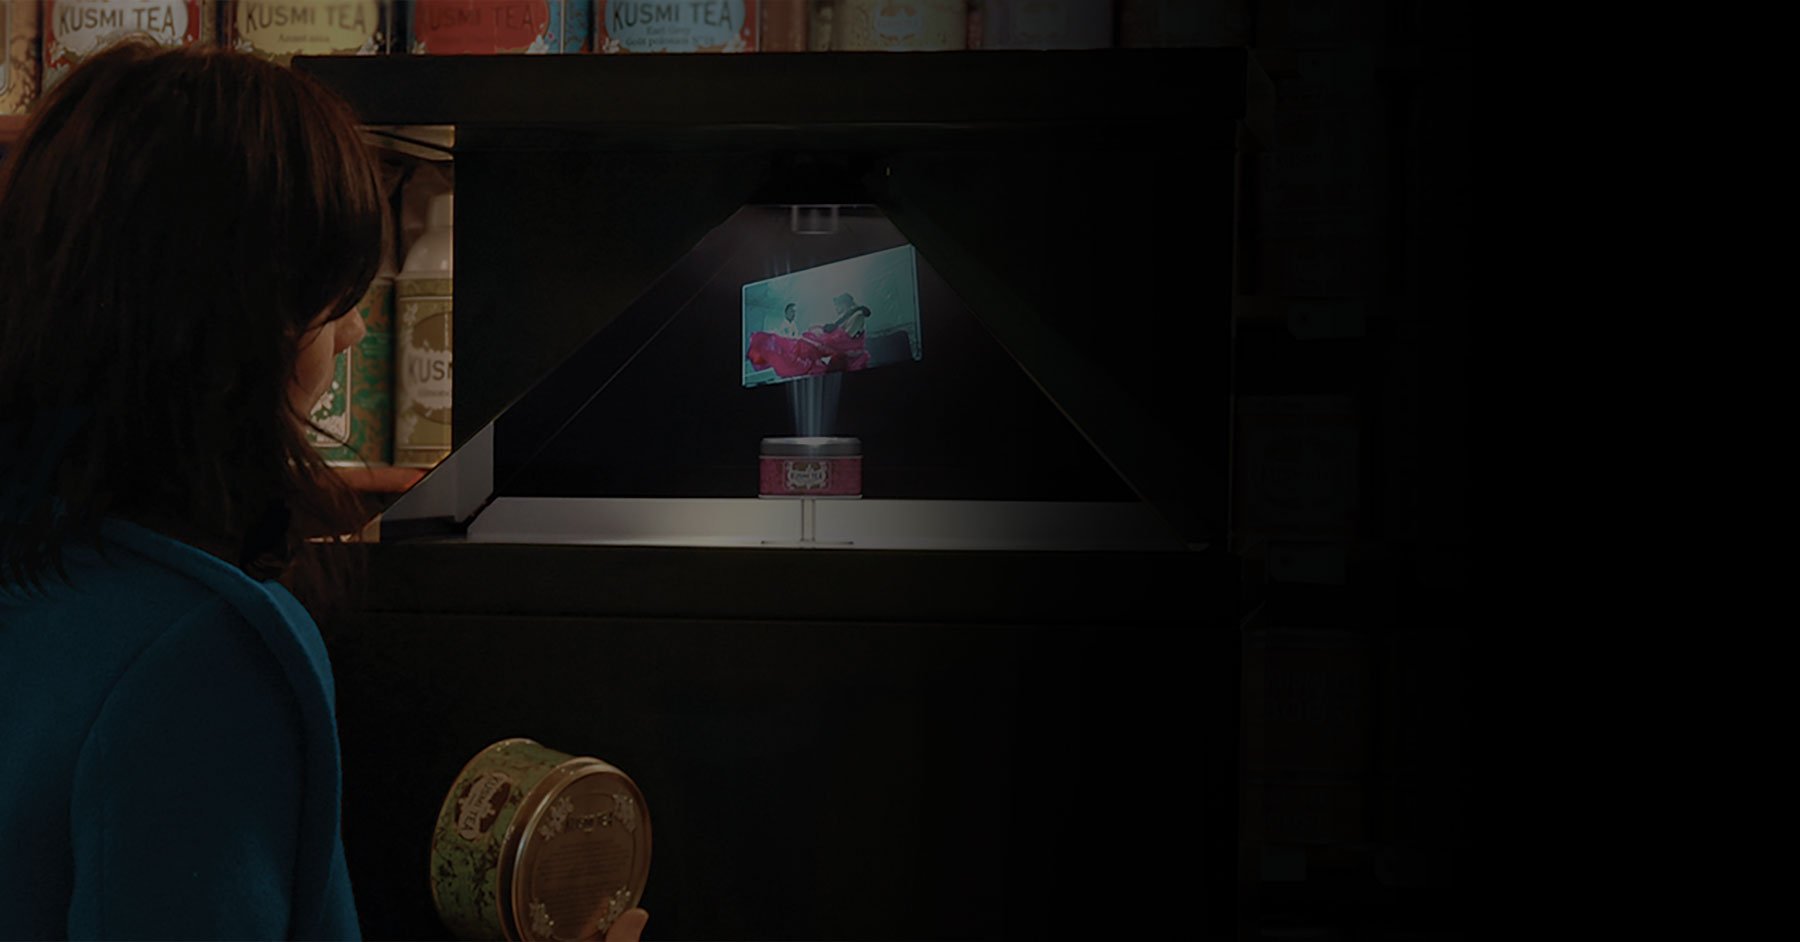 In-store marketing for Kusmi in a retail store using a 3D hologram